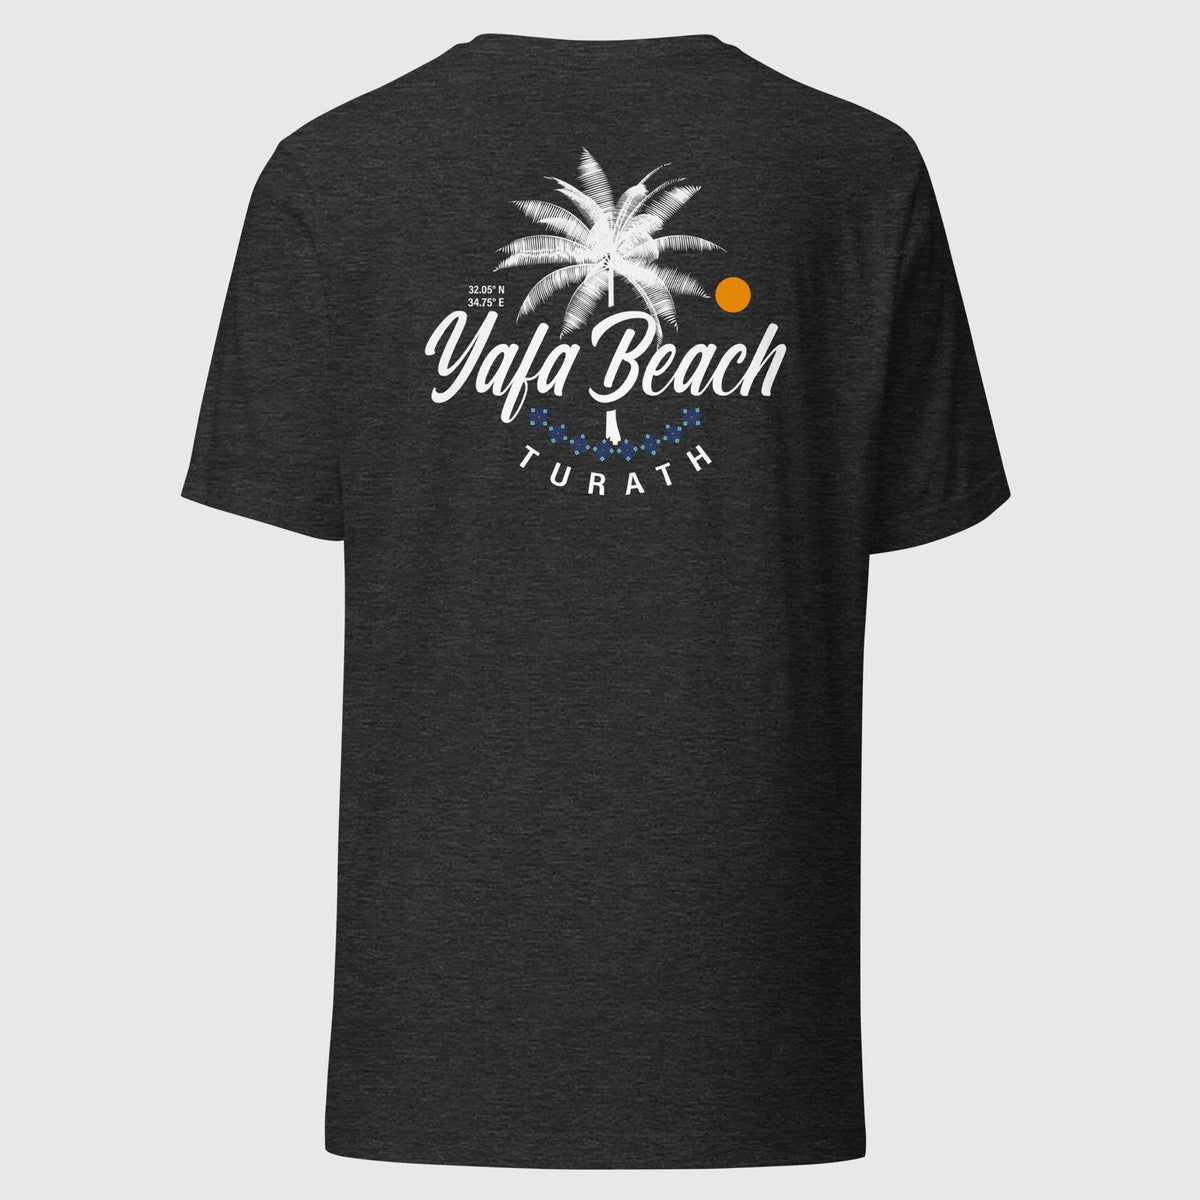 new Jaffa on the map tees